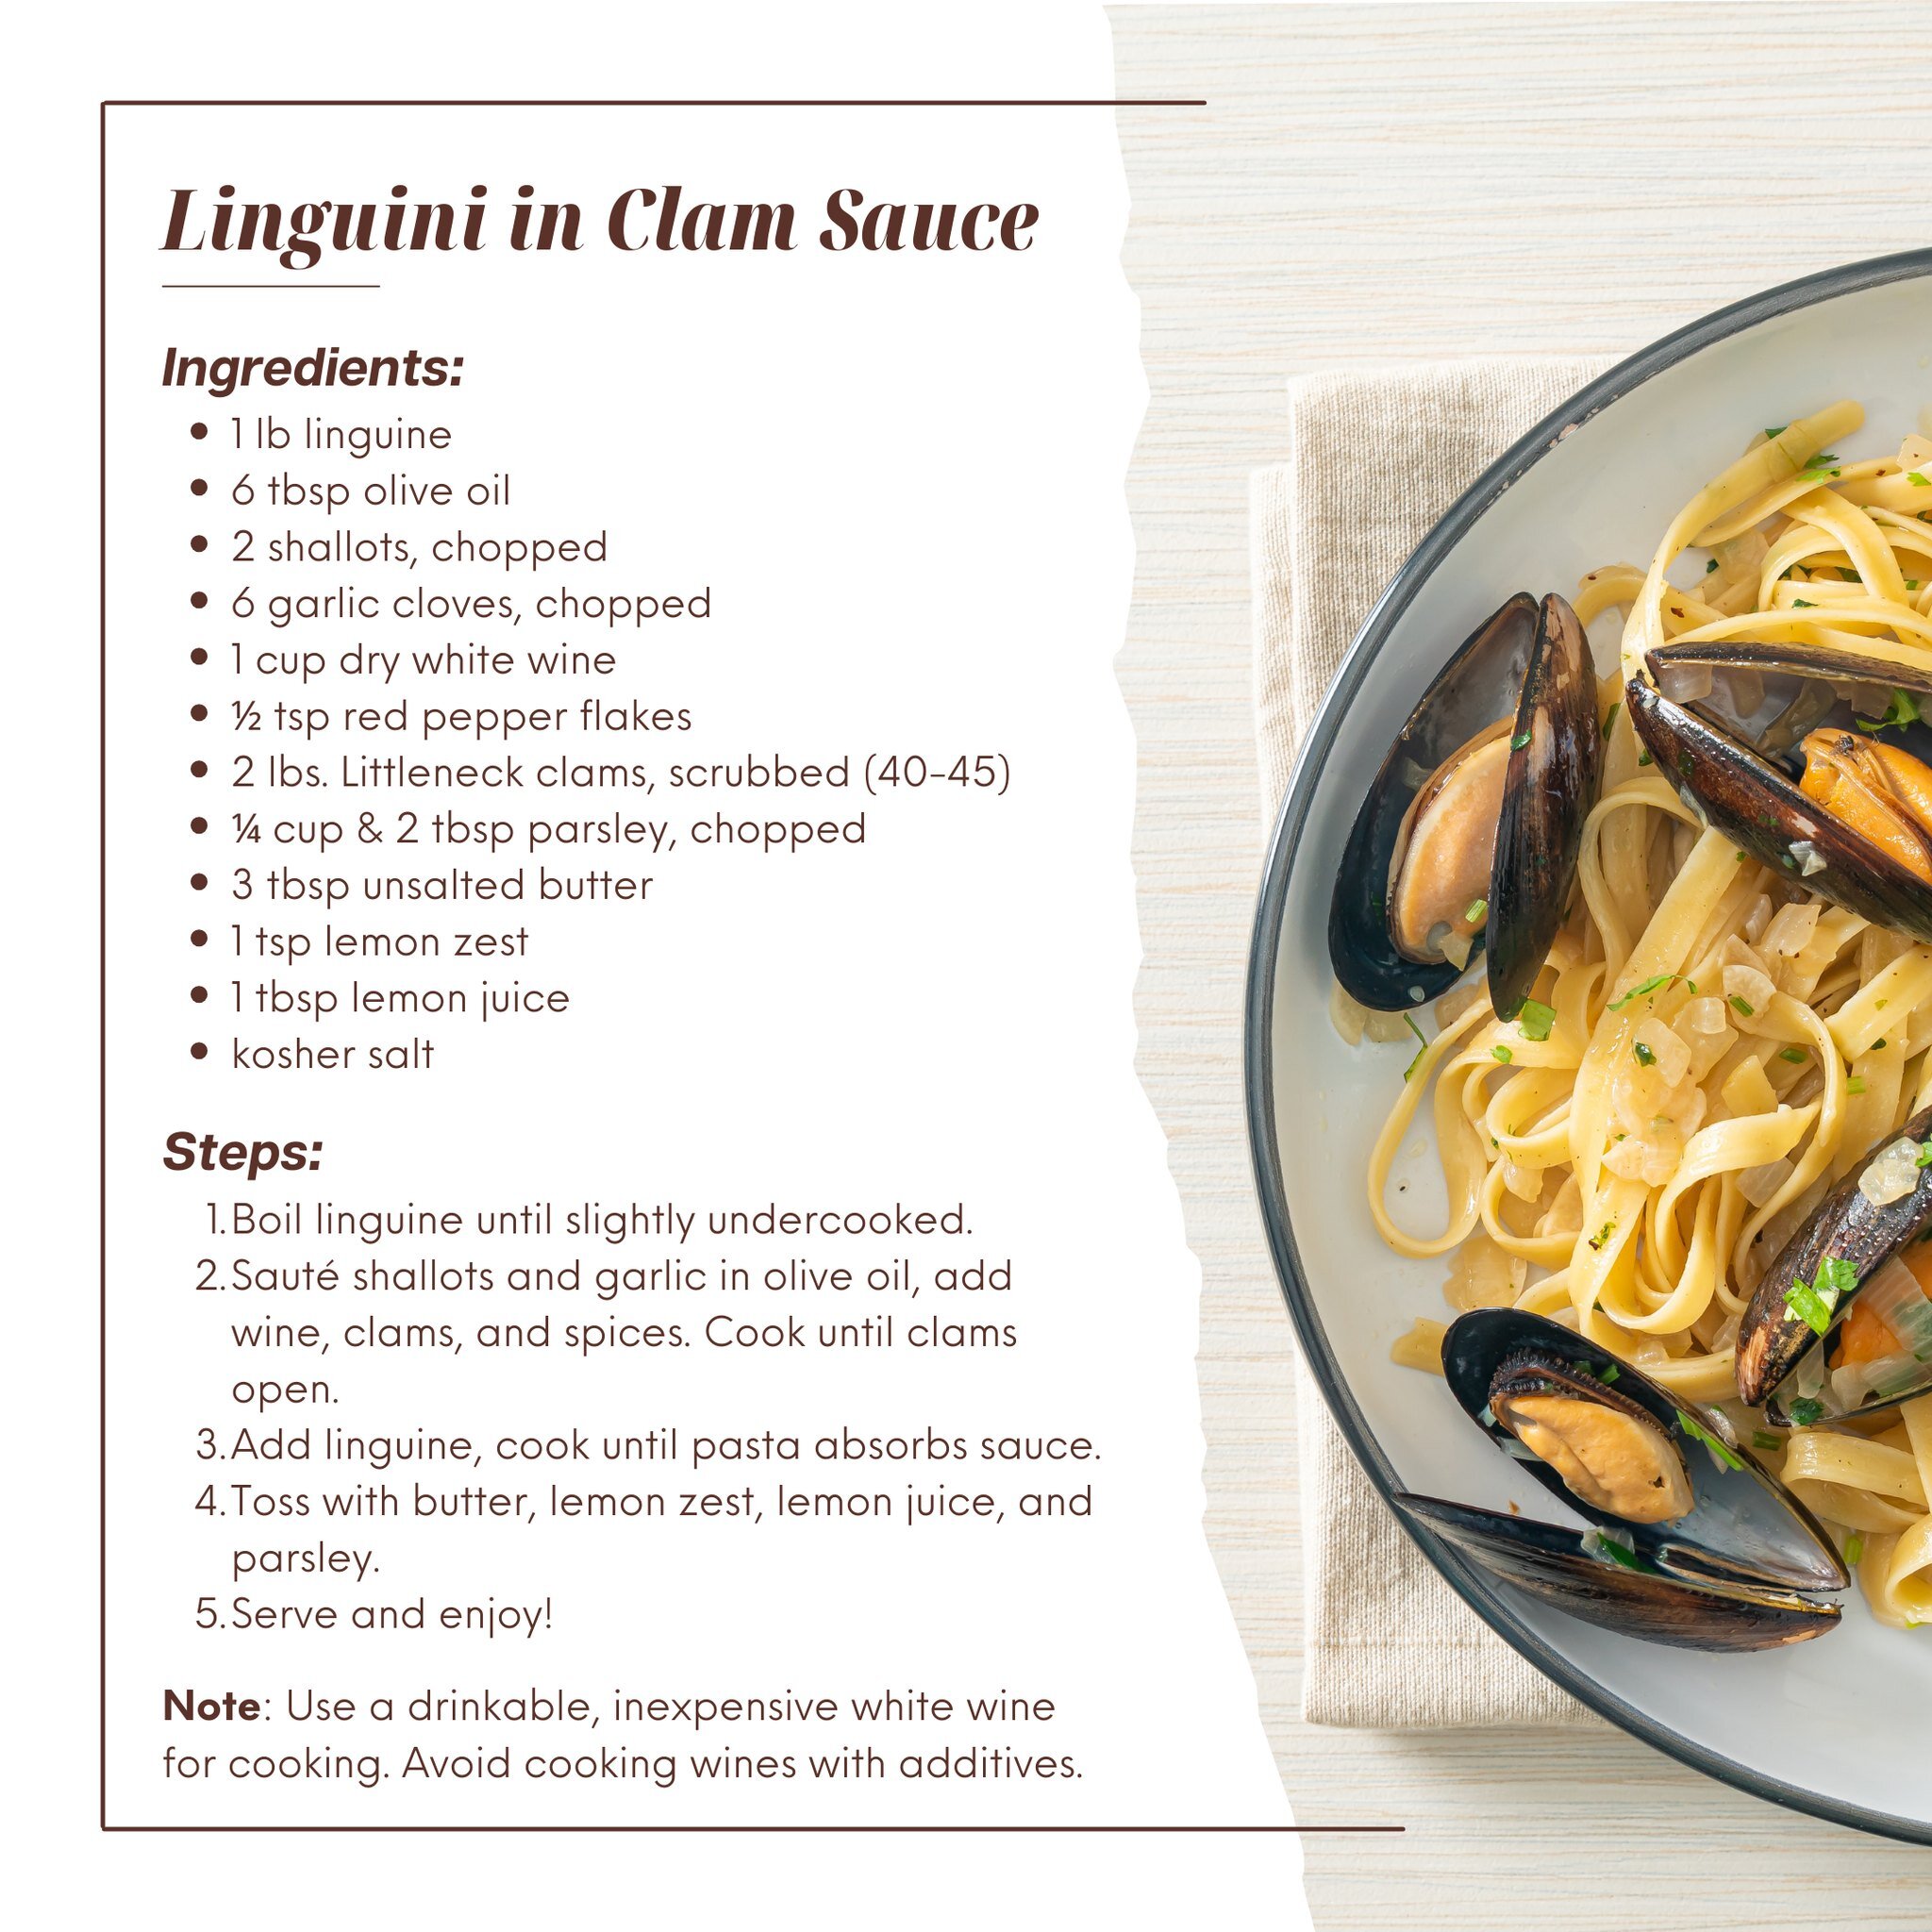 🍝 My Favorite Recipe 🍝

My favorite recipe doesn&rsquo;t in fact contain jelly&hellip;who knew that would be a thing?? 

I have always loved linguine in clam sauce. 🍝🦪 It is my special treat when I take myself out on a date night. 💃 I make it fo